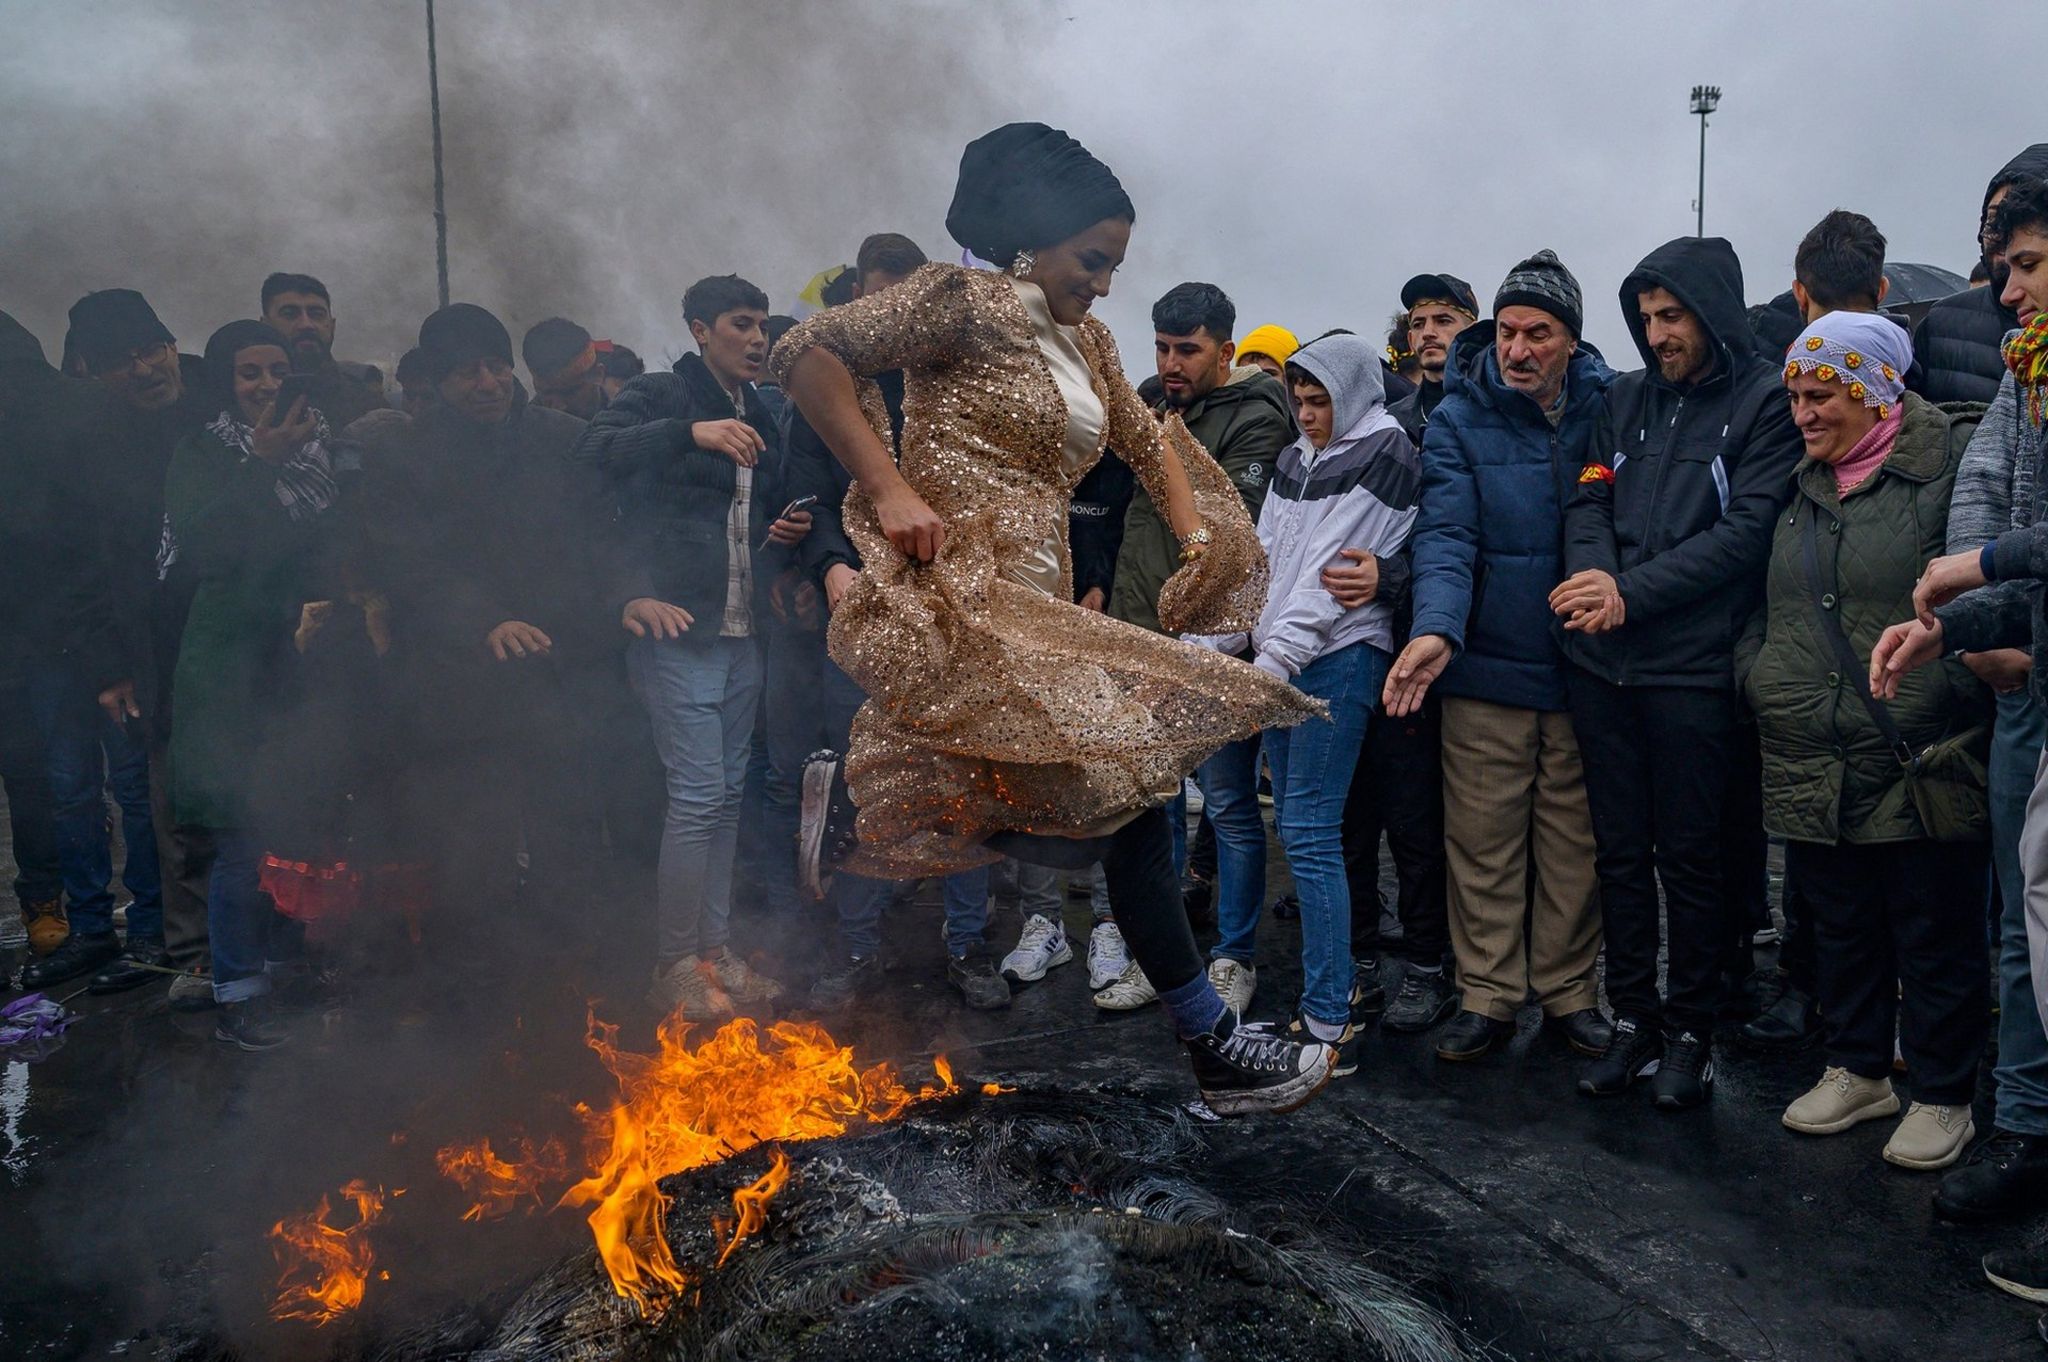 A woman jumps over fire as part of Nowruz celebrations in Iran